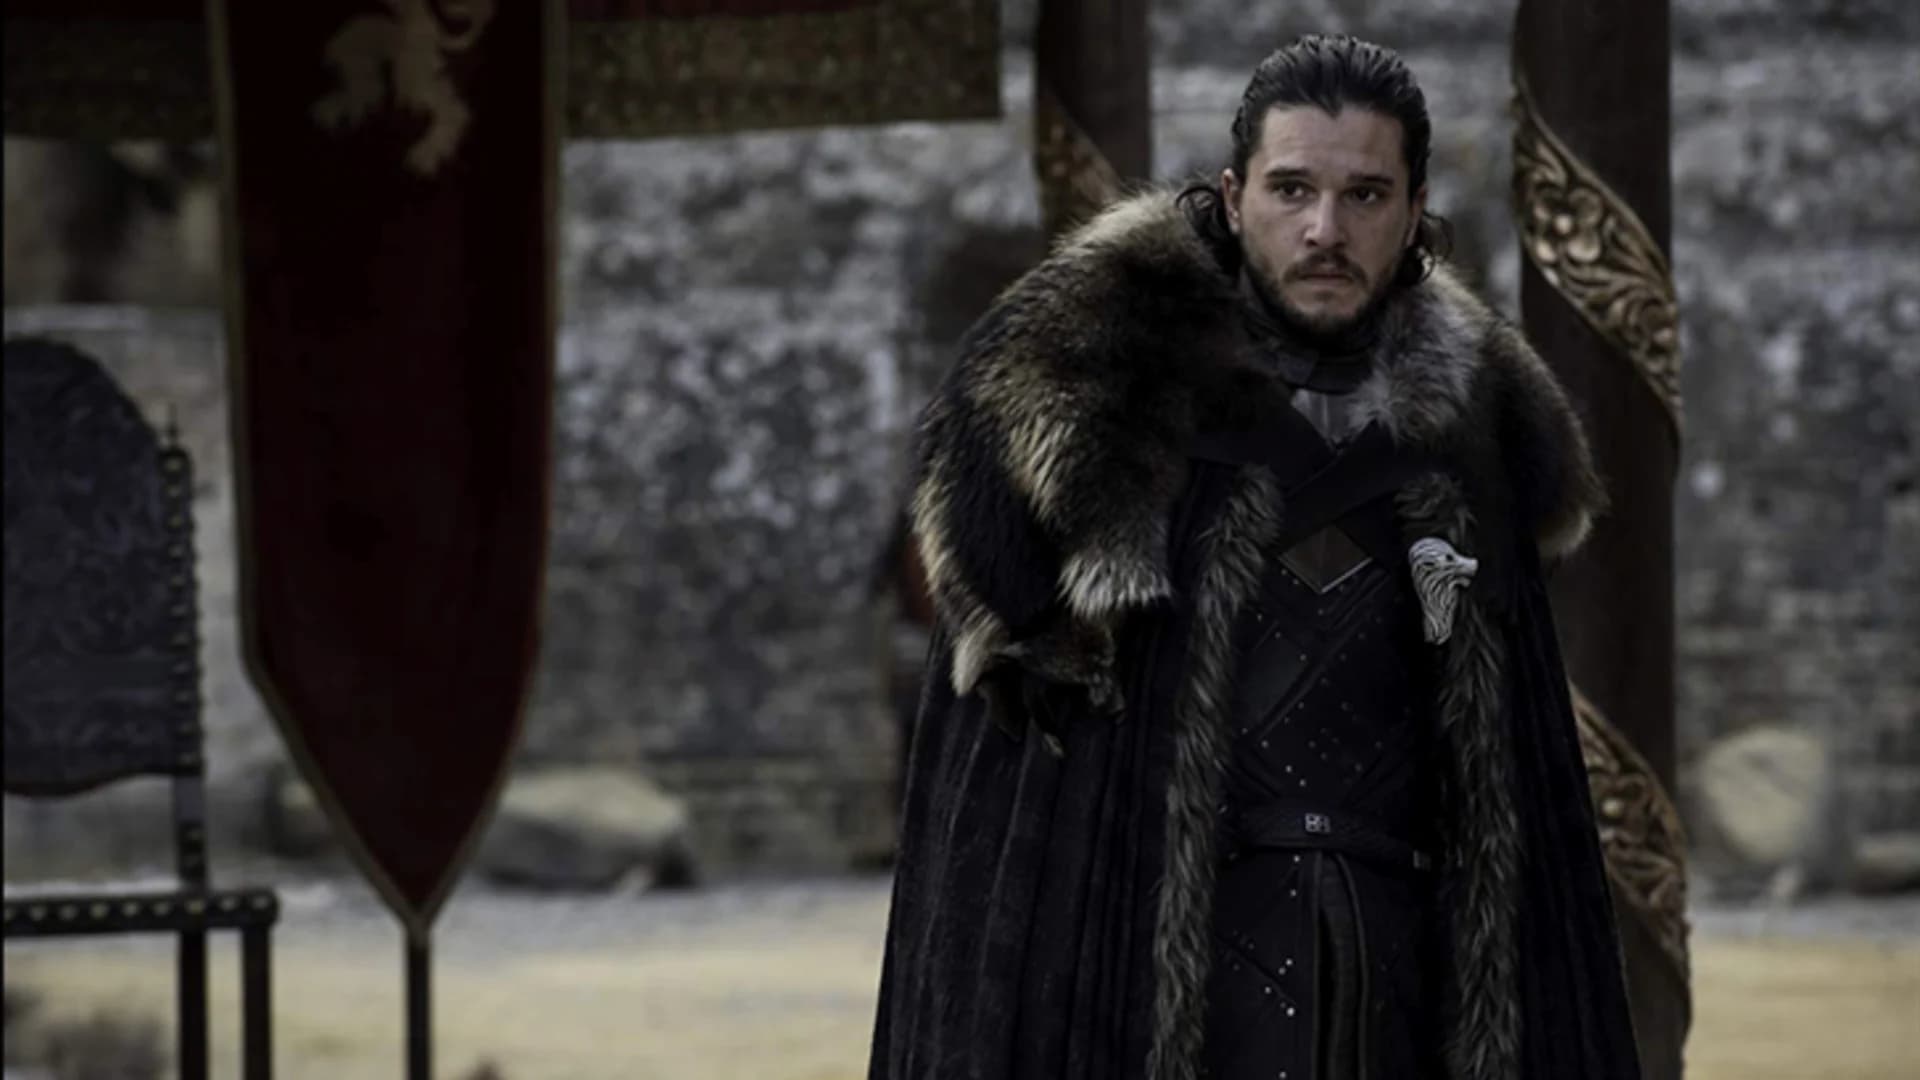 HBO drops trailer for final 'Game of Thrones' season